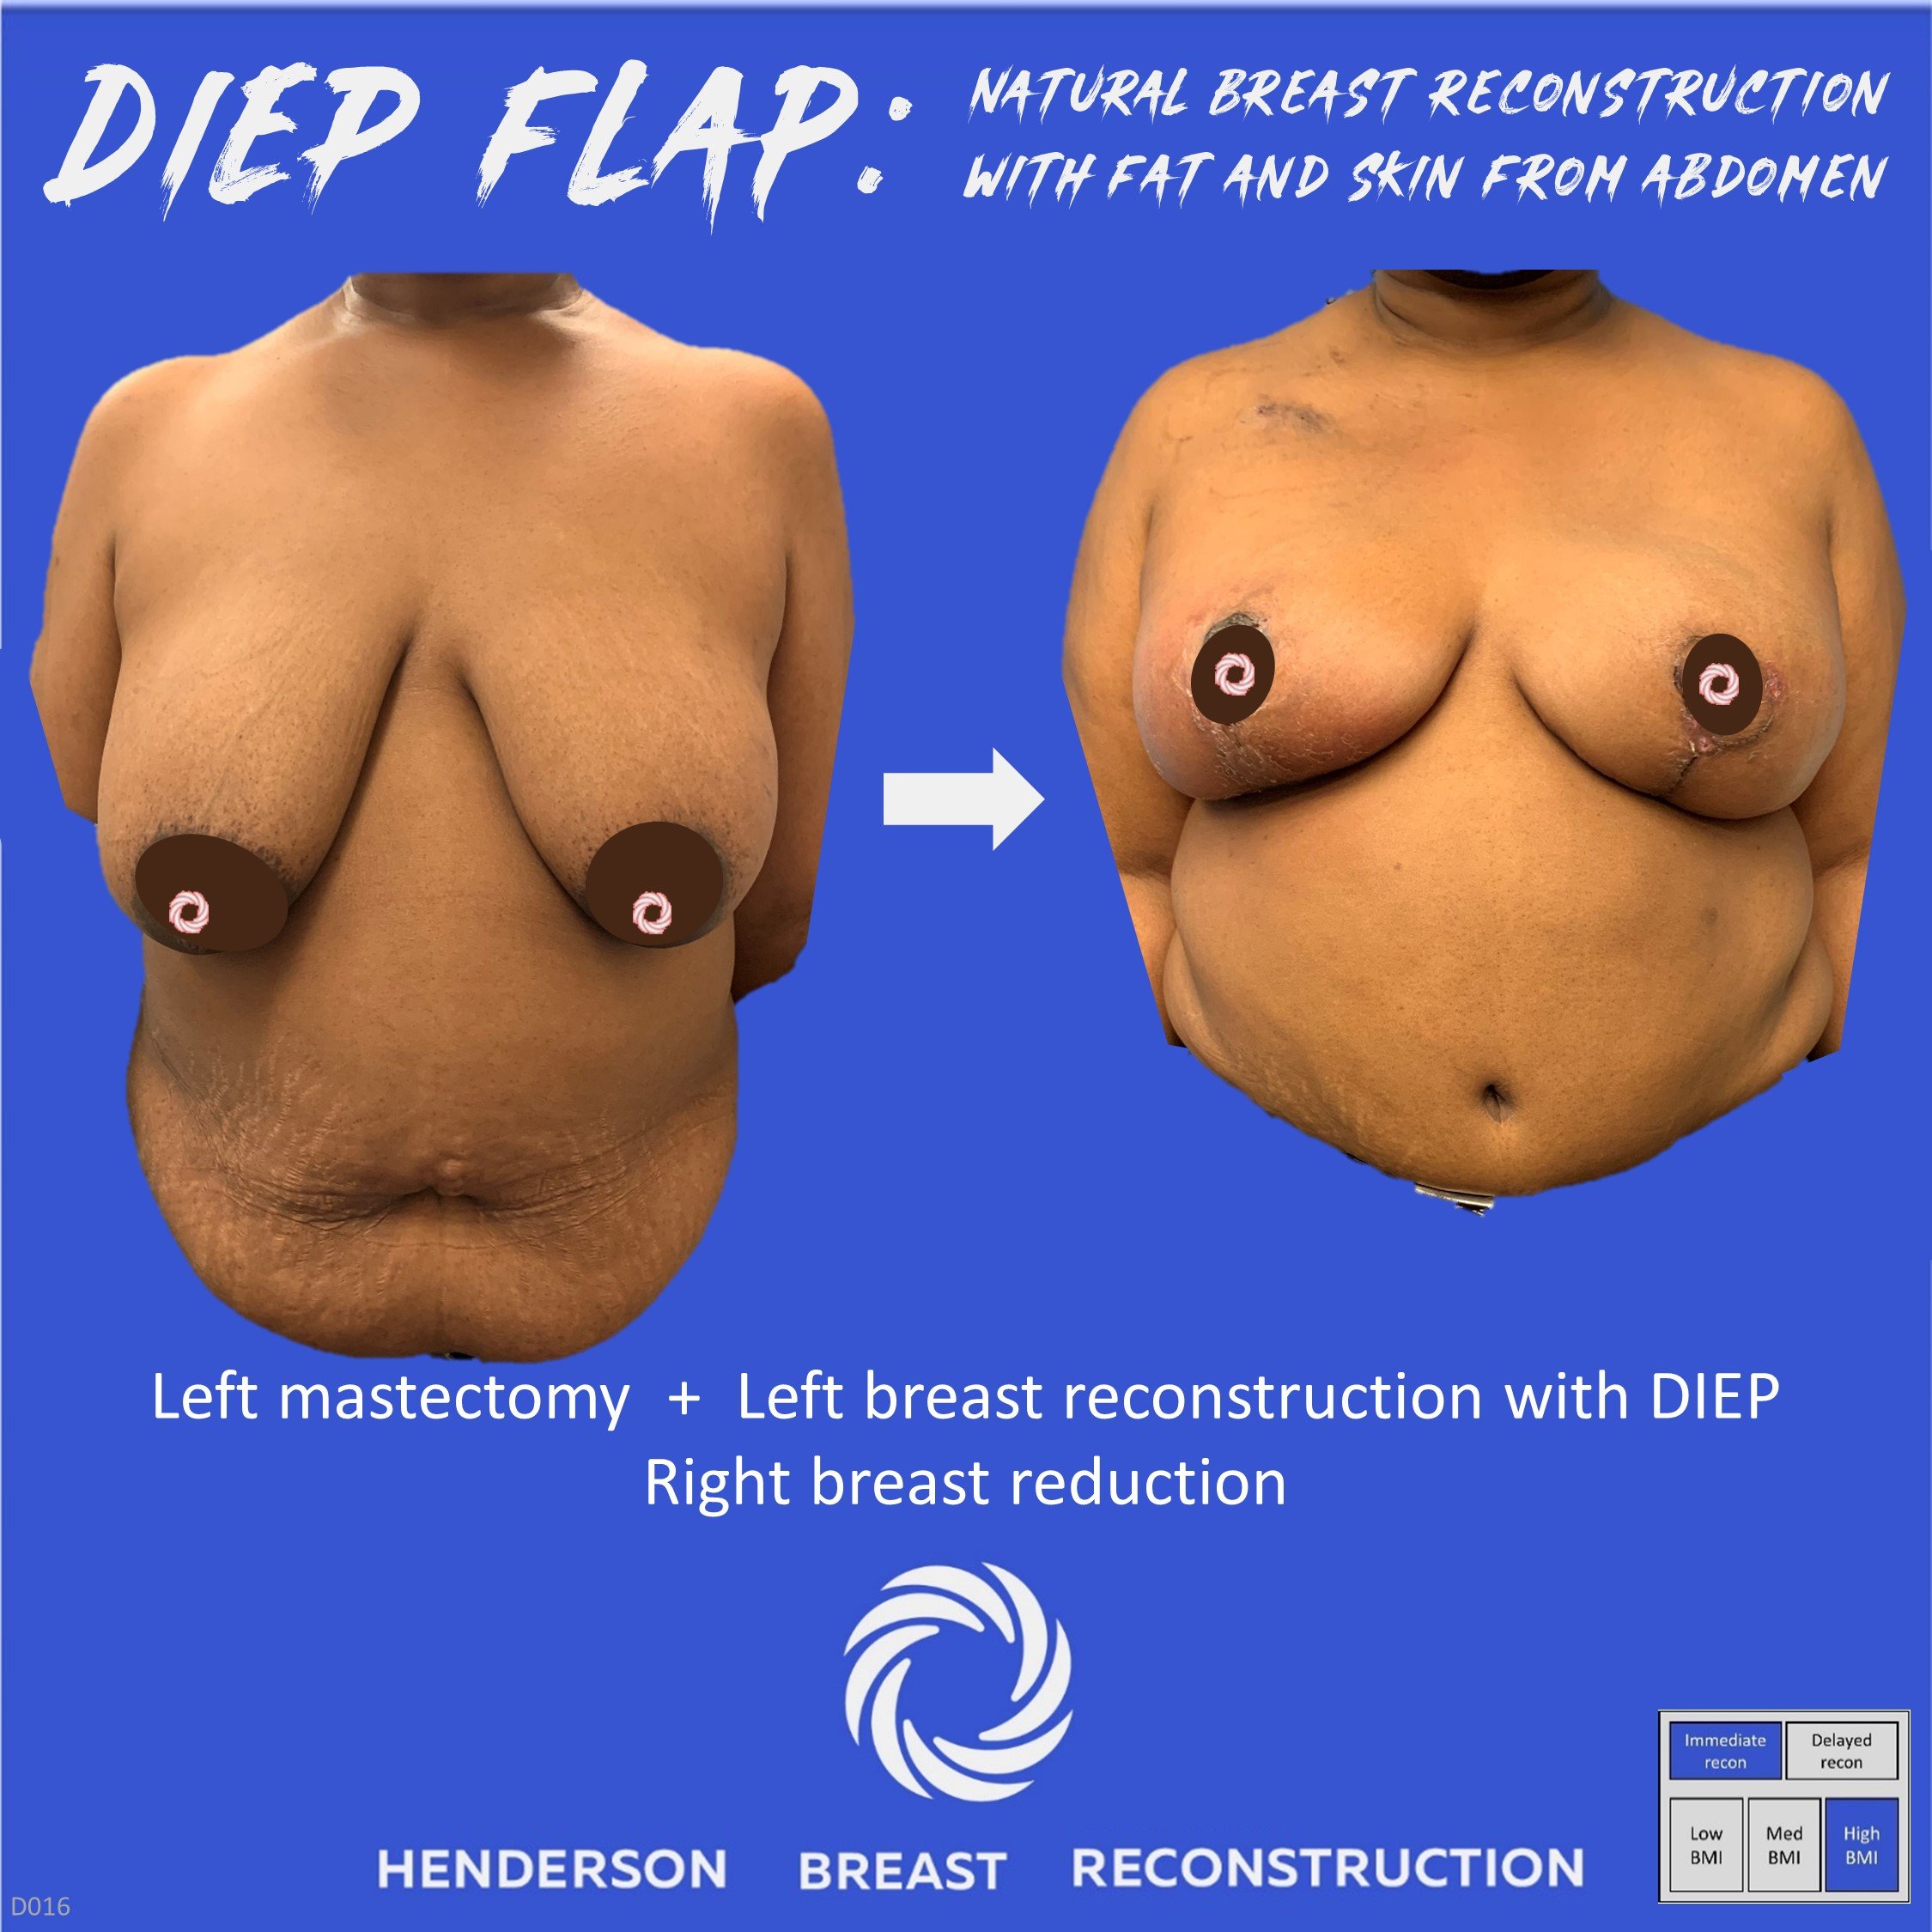 Image of delayed DIEP breast reconstruction (left breast) and